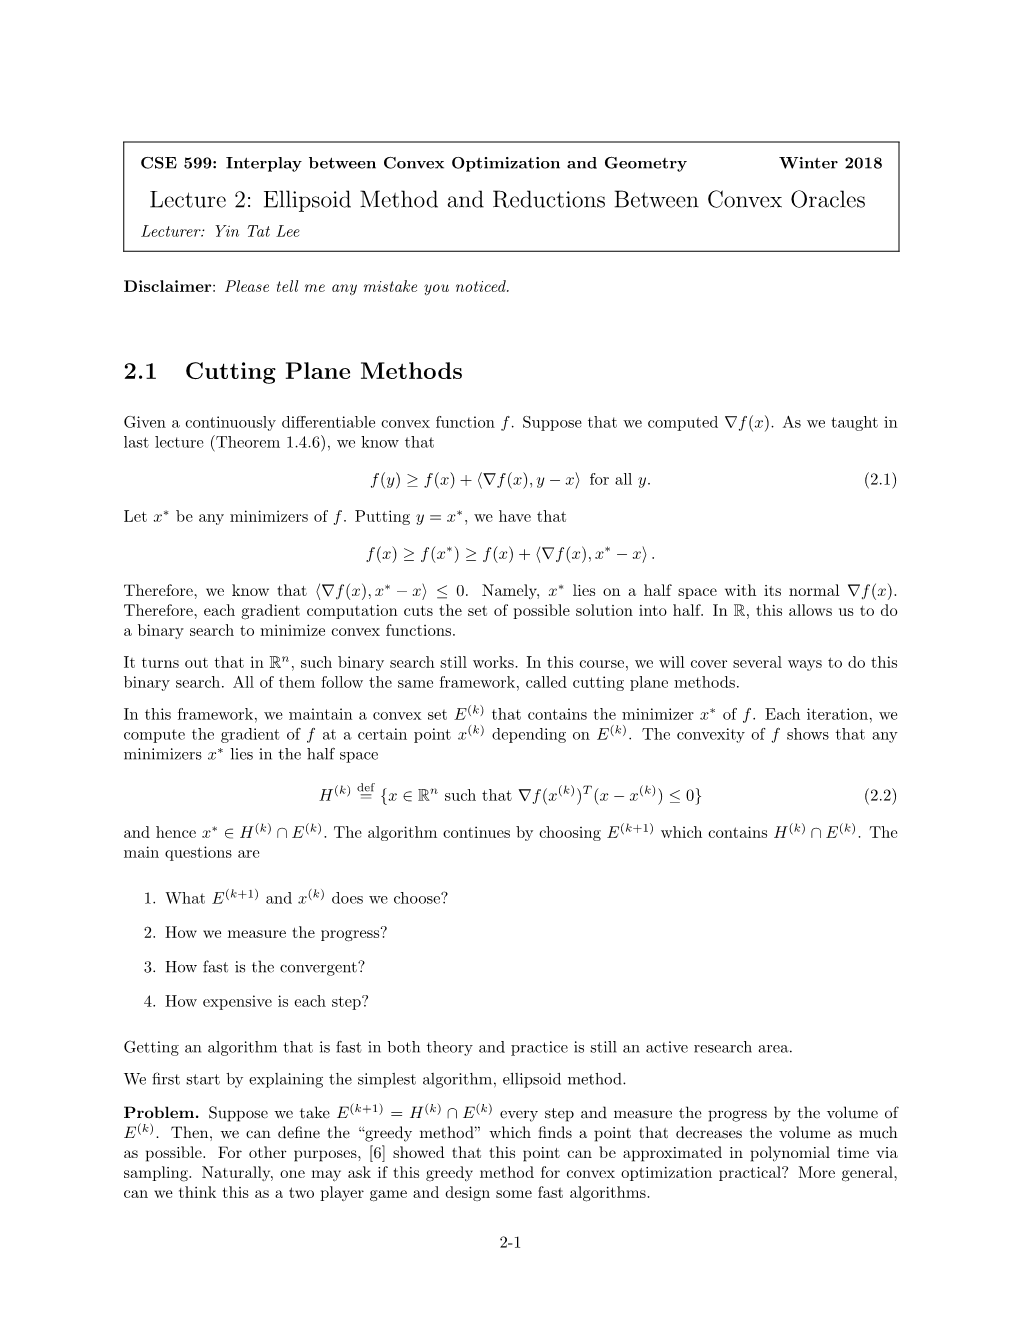 Ellipsoid Method and Reductions Between Convex Oracles 2.1 Cutting Plane Methods